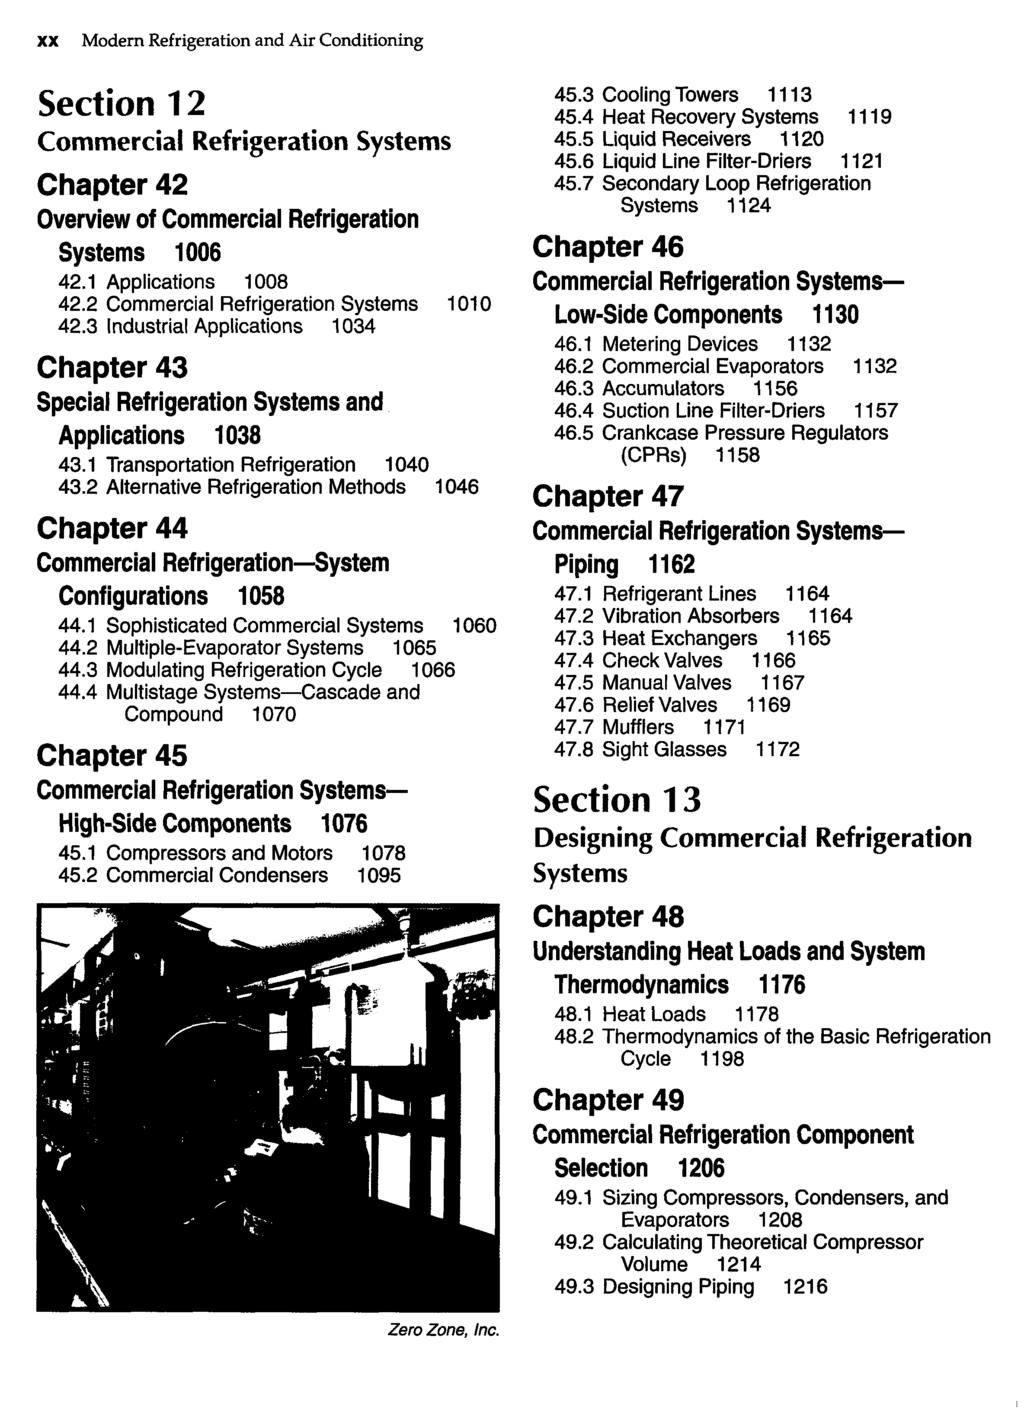 XX Modern Refrigeration and Air Conditioning Section 12 Commercial Refrigeration Systems Chapter 42 Overview of Commercial Refrigeration Systems 1006 42.1 Applications 1008 42.